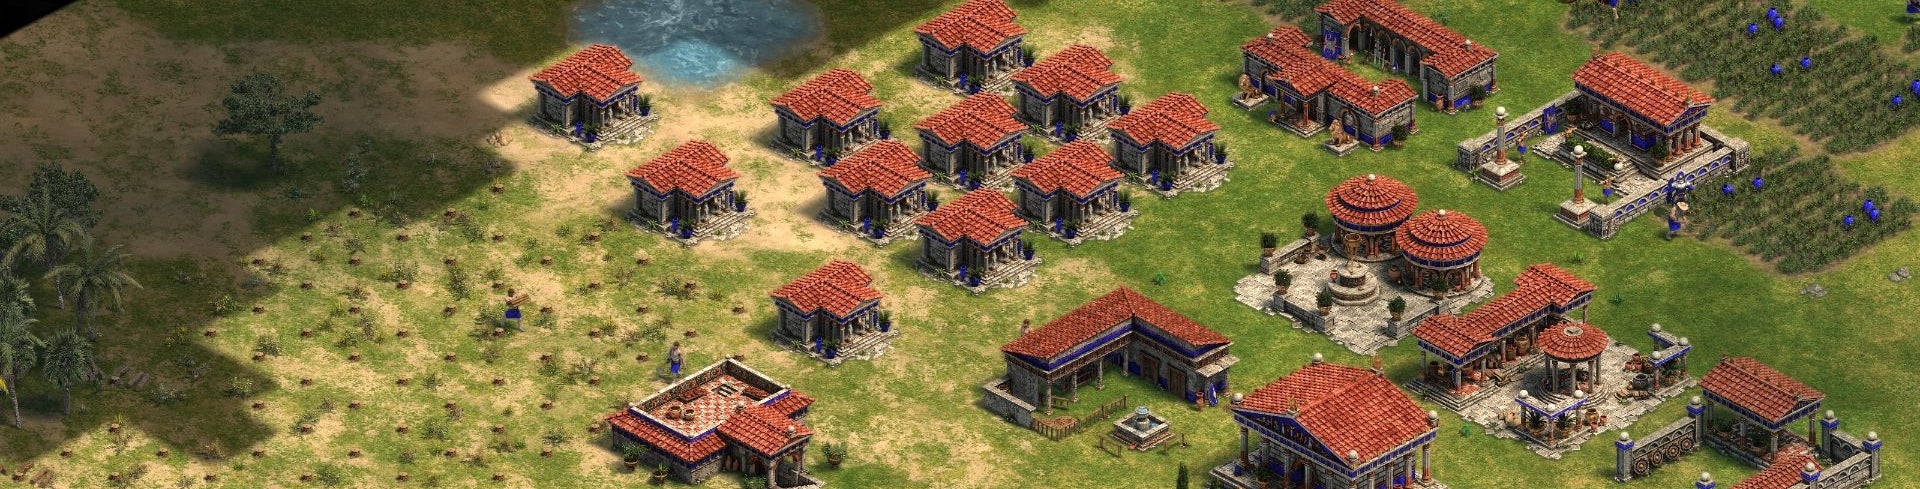 Image for Age of Empires: Definitive Edition review - RTS revival doesn't go quite far enough